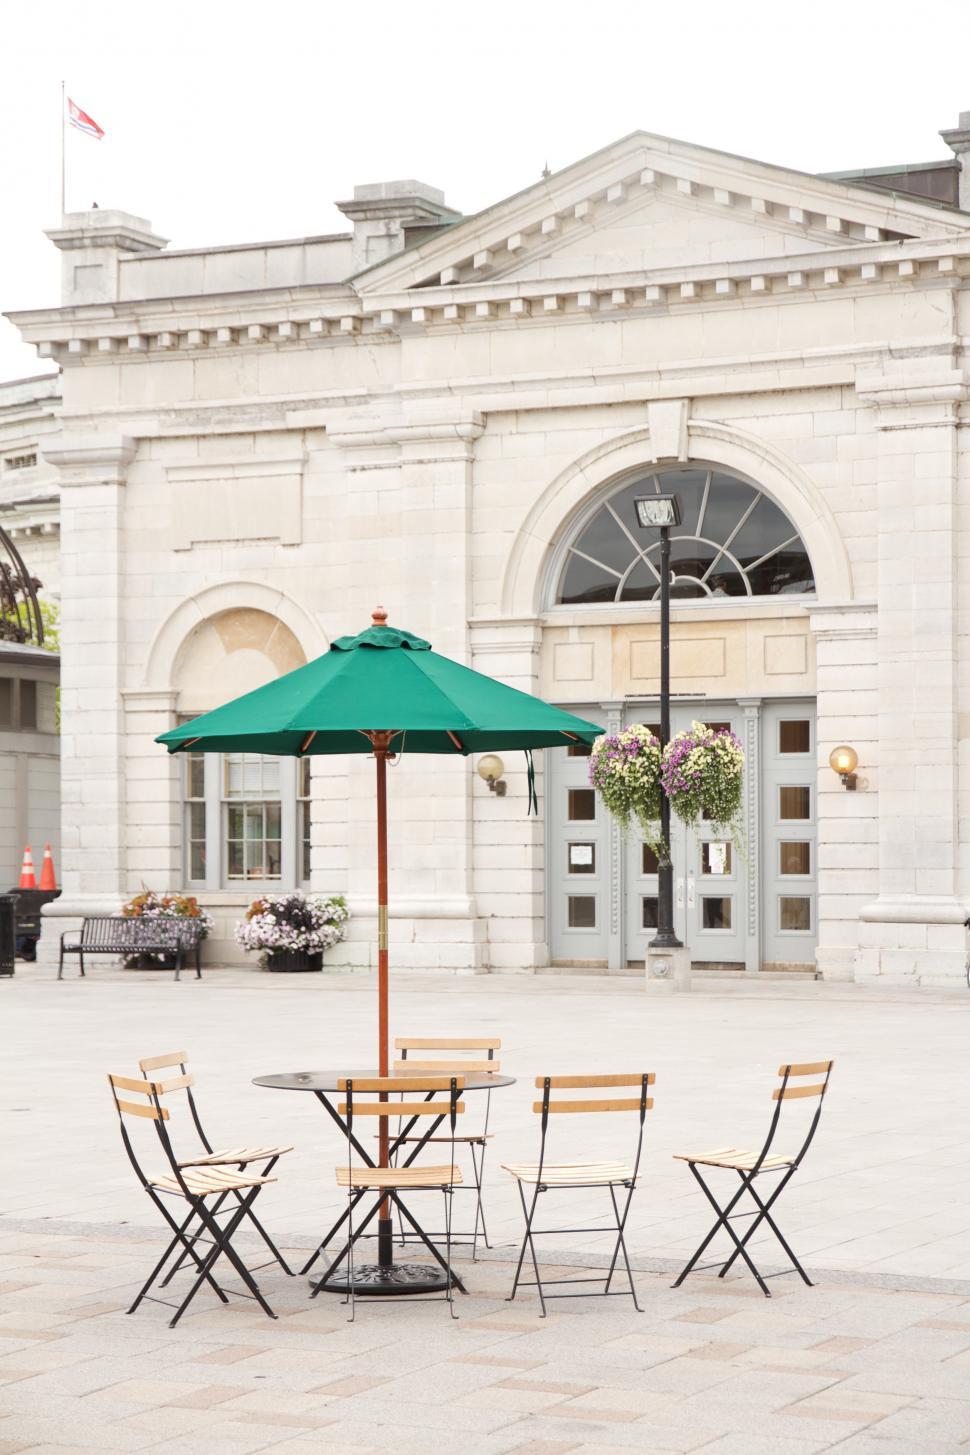 Free Image of Outdoor Dining Area With Umbrella in Front of Building 